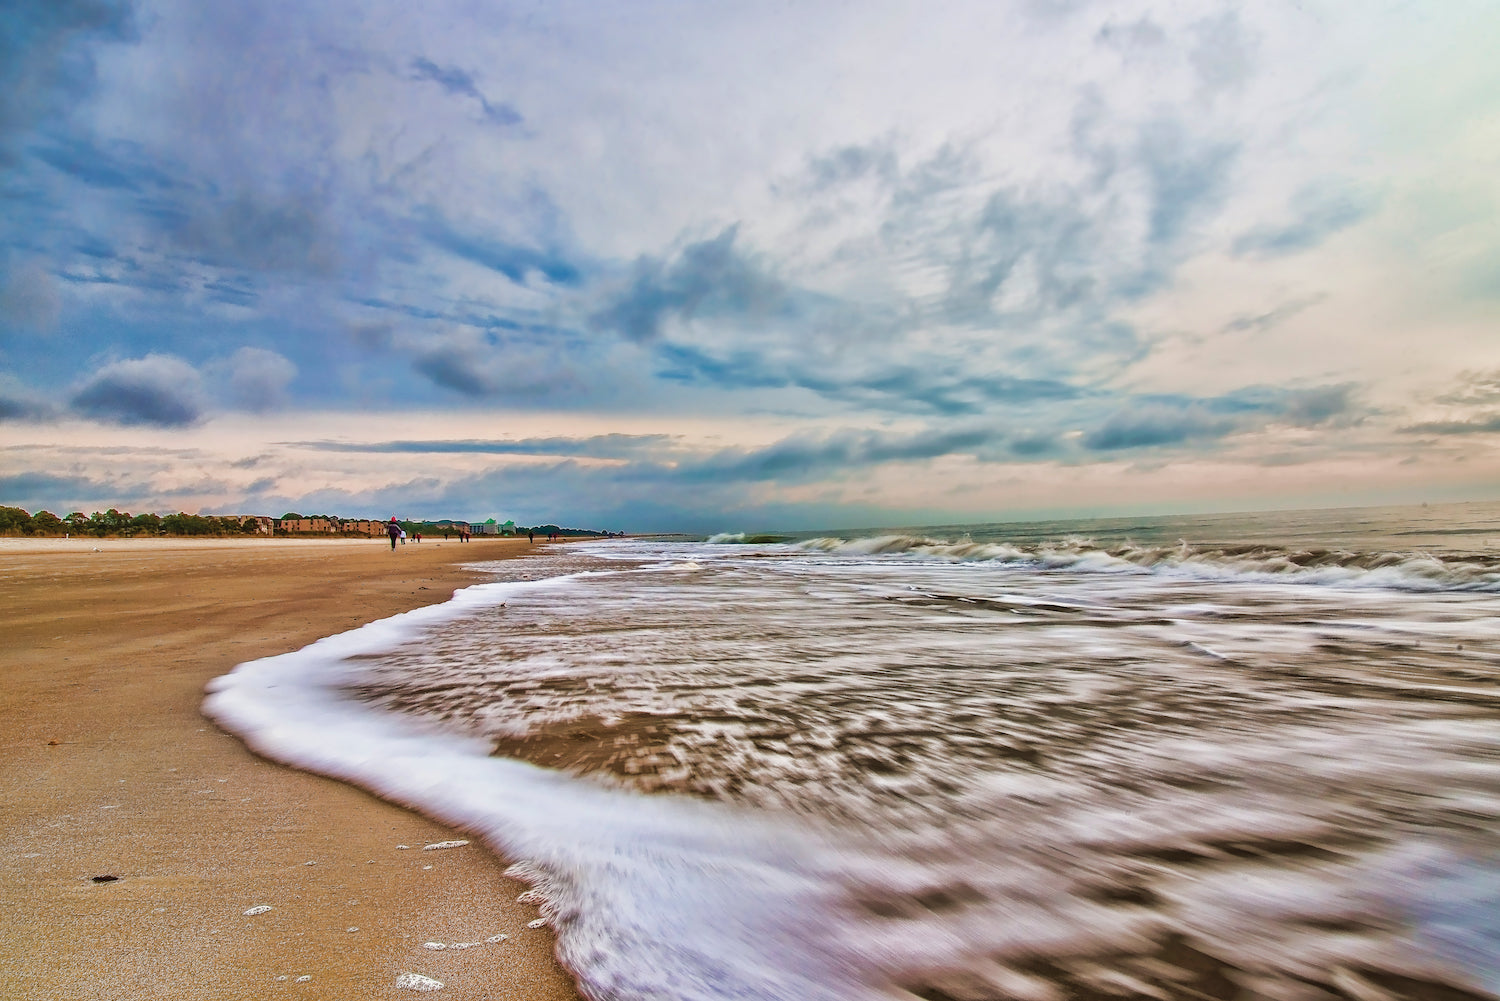 Breath taking beach and sea photograph from Hilton Head Island - Interactive Book. Published by Starbooks